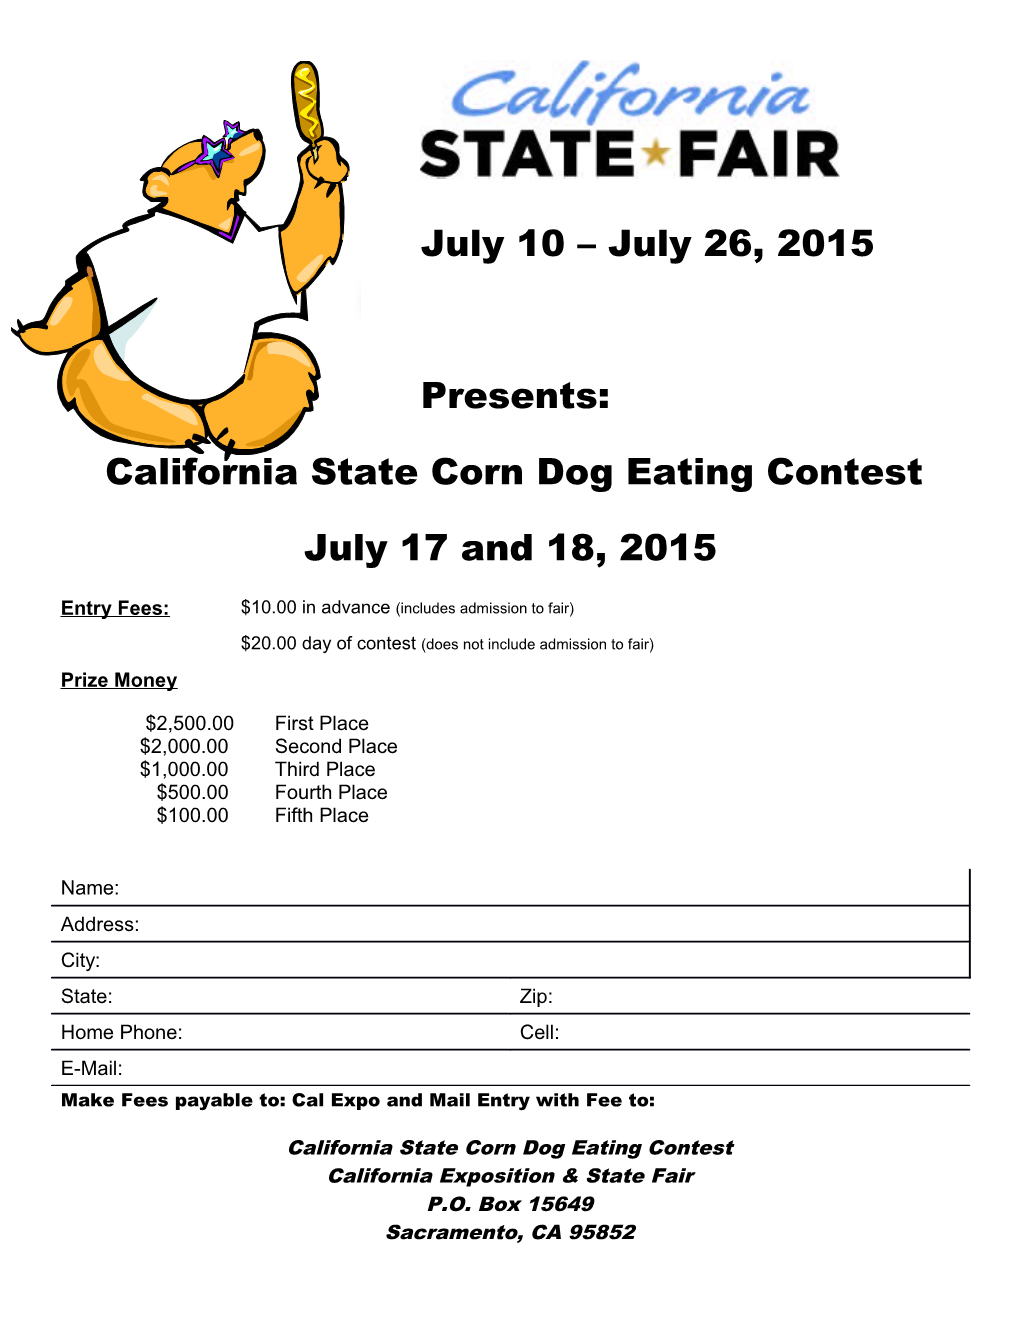 California State Corn Dog Eating Contest